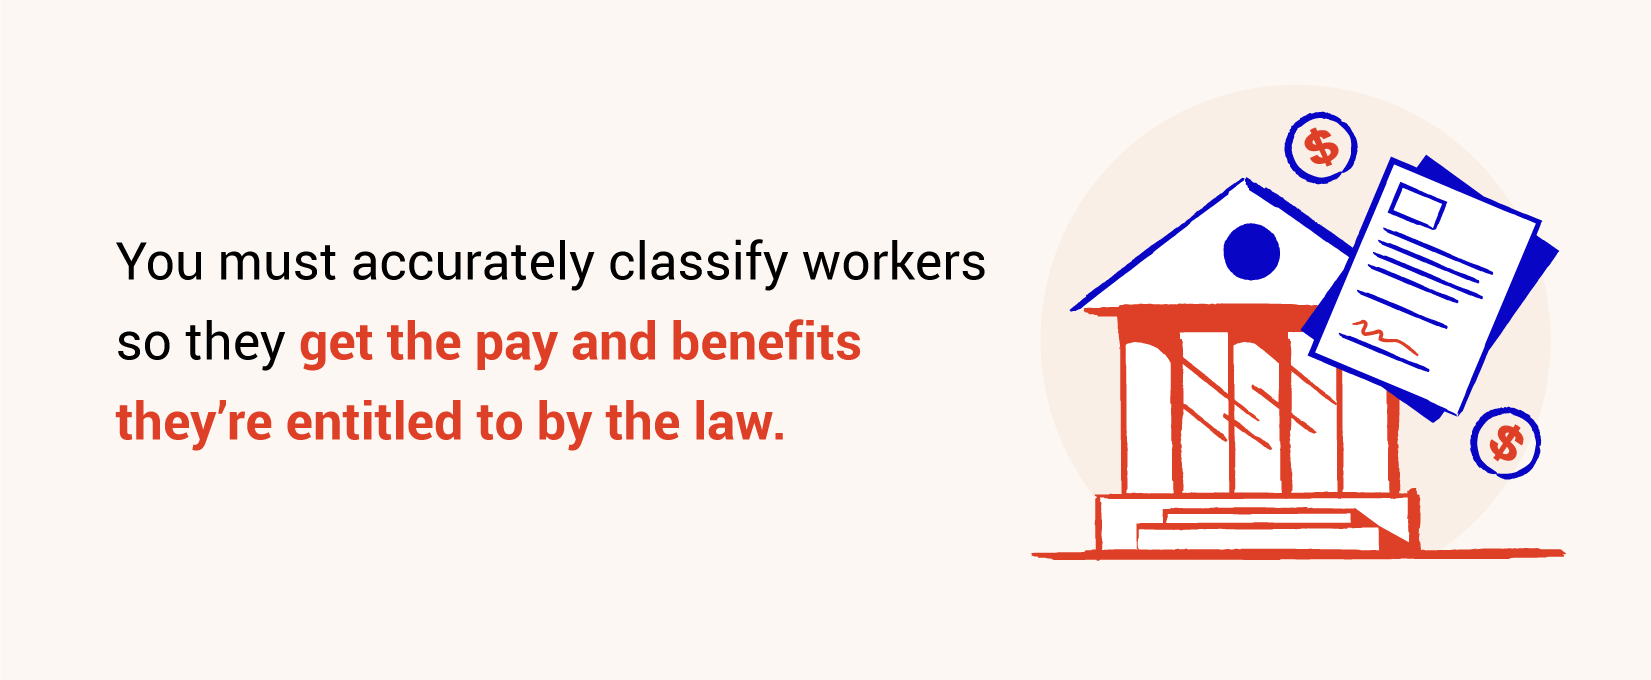 you must accurately classify workers so they get the pay and benefits they're entitled to by the law